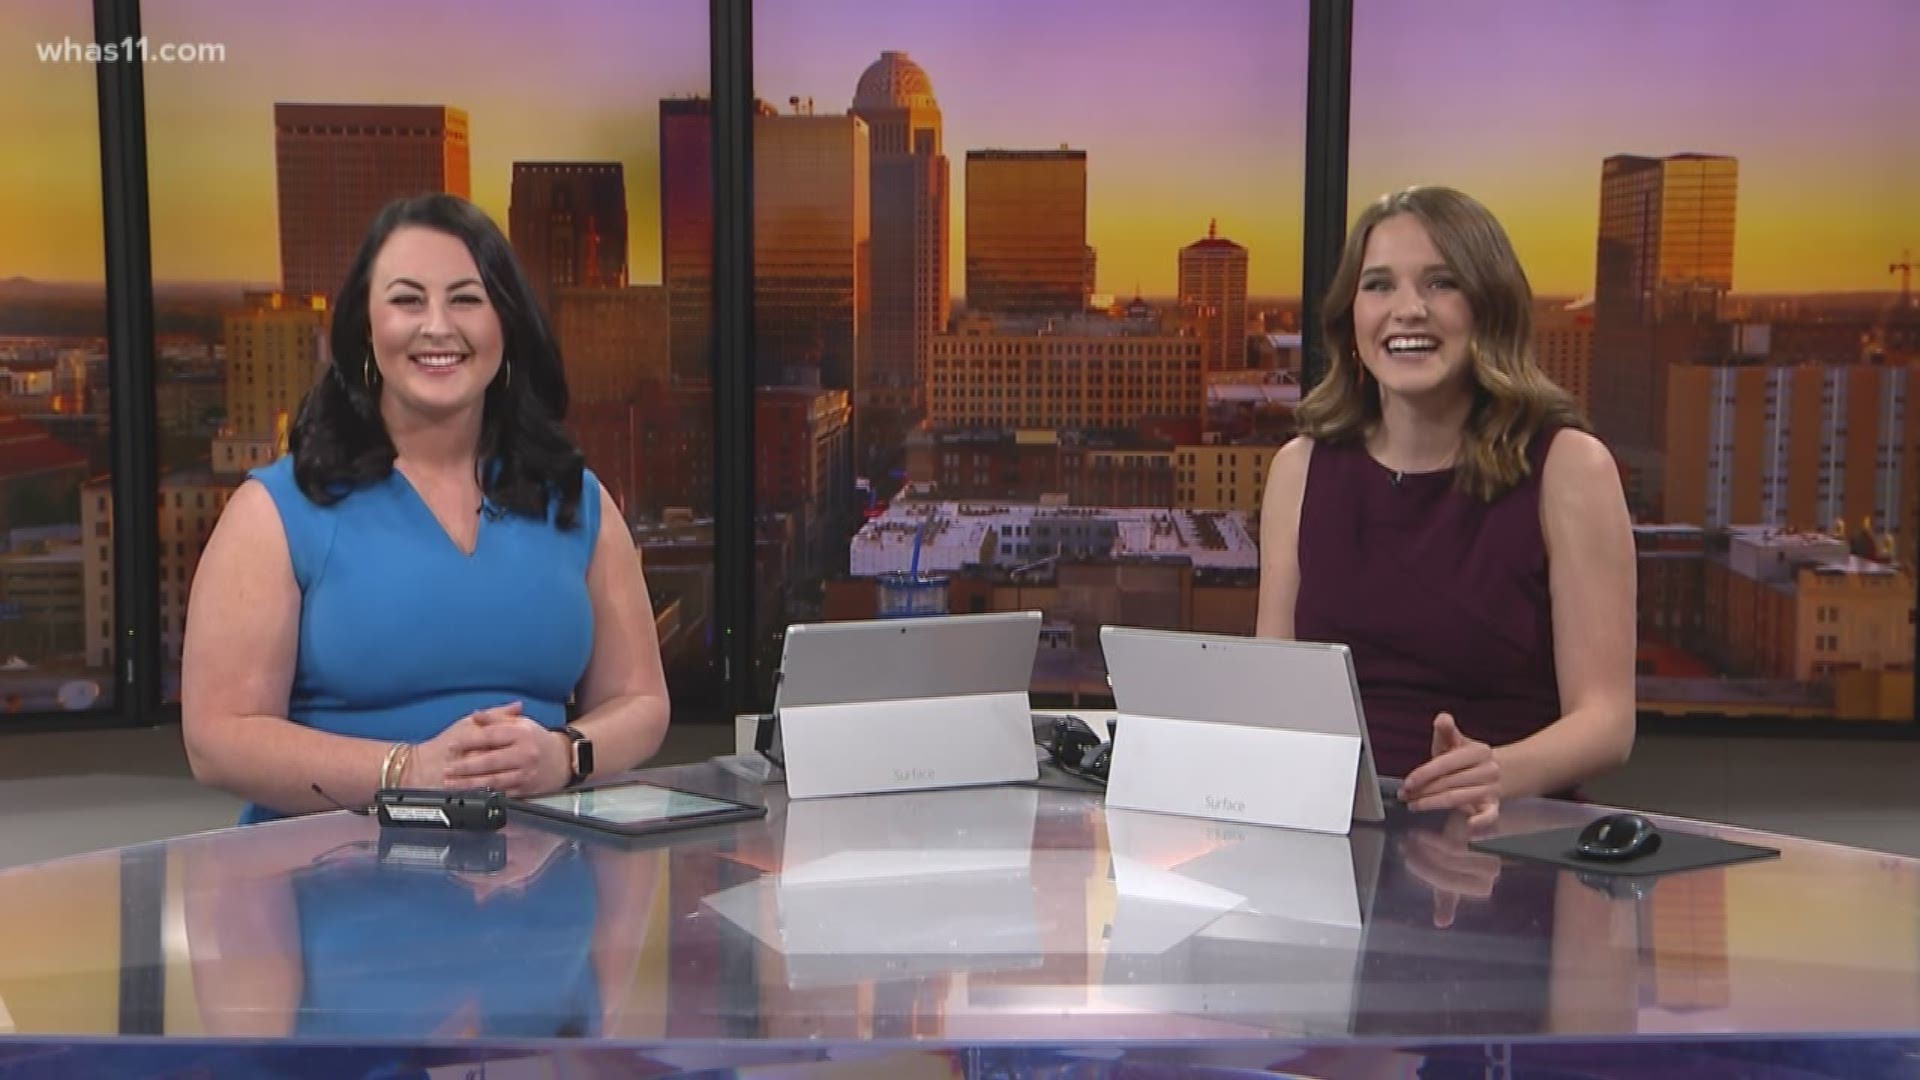 Louisville native Hayley Minogue is returning to her hometown to anchor GMK Weekend, bringing news that she hopes showcases the community's amazing members.